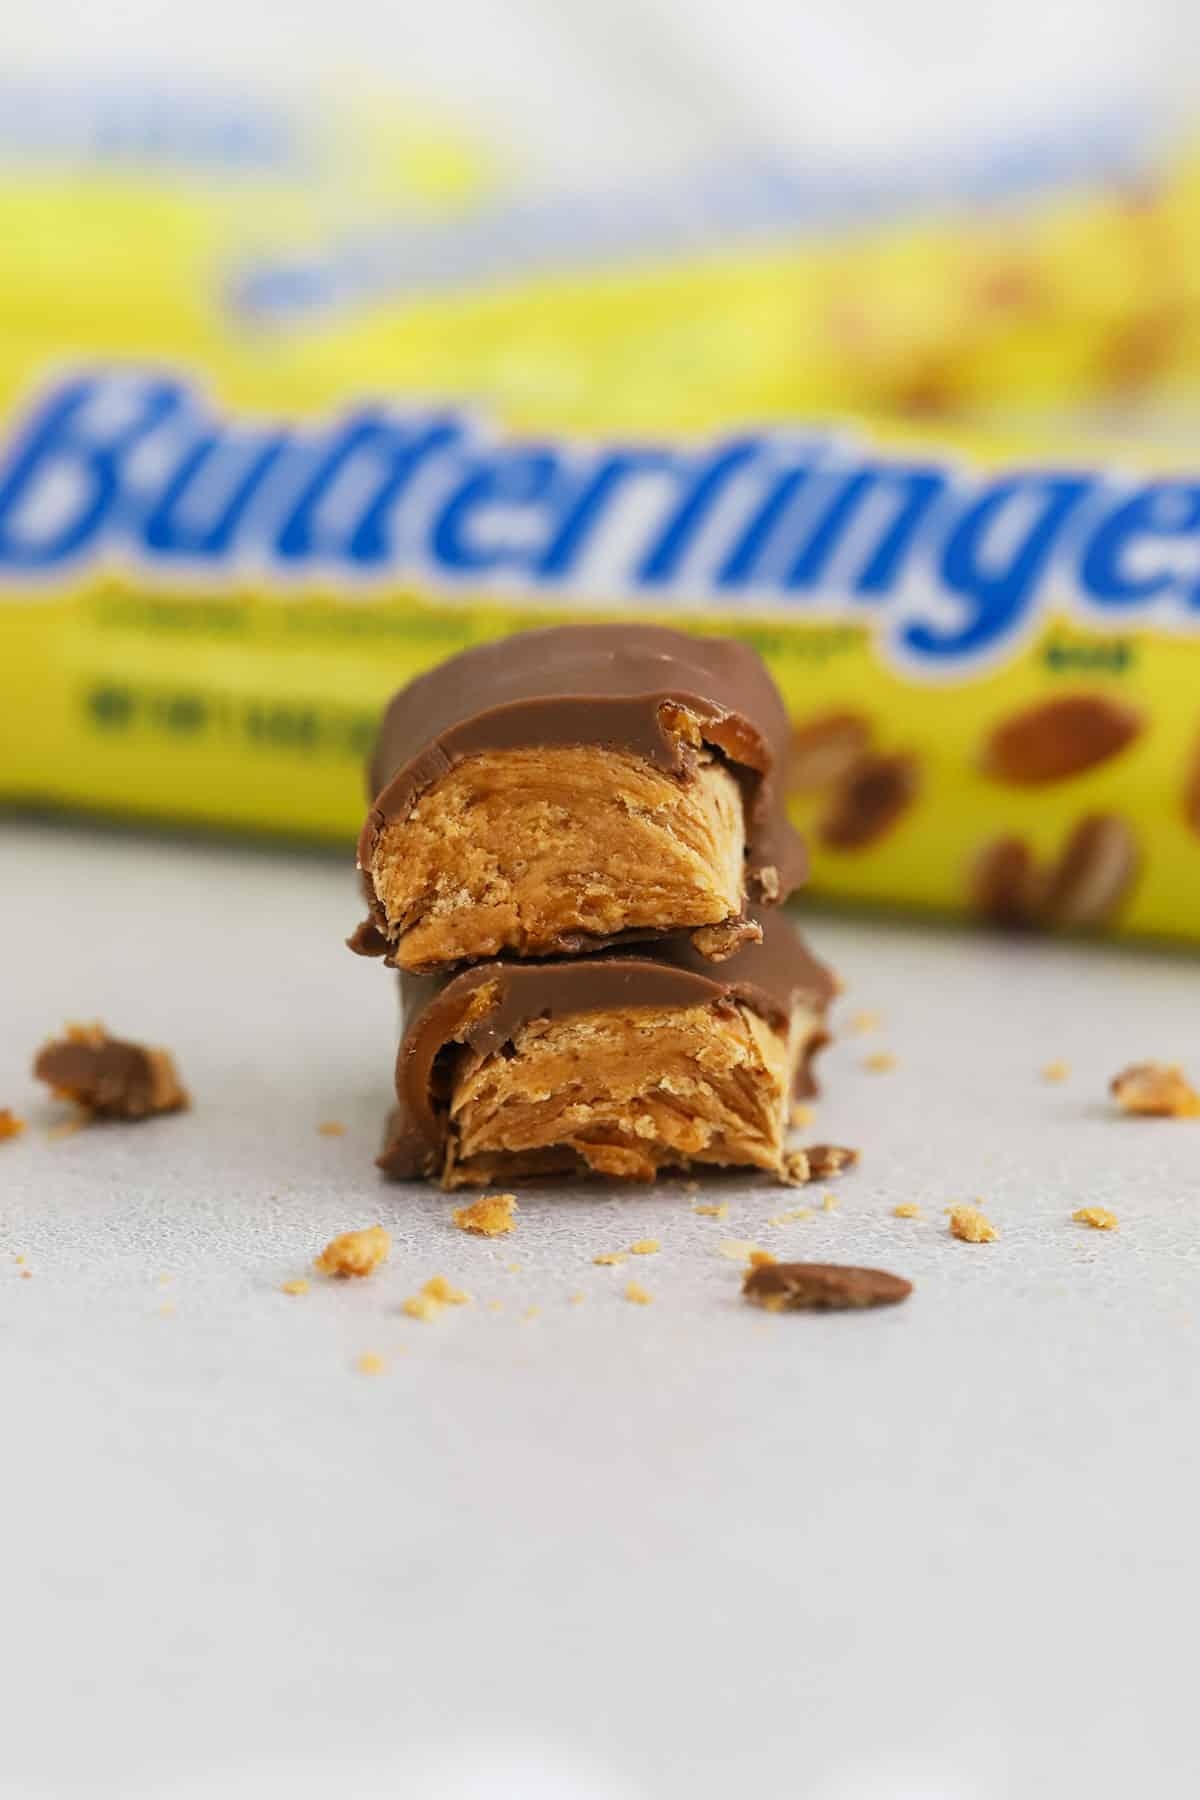 a butterfinger candy bar cut in half and stacked